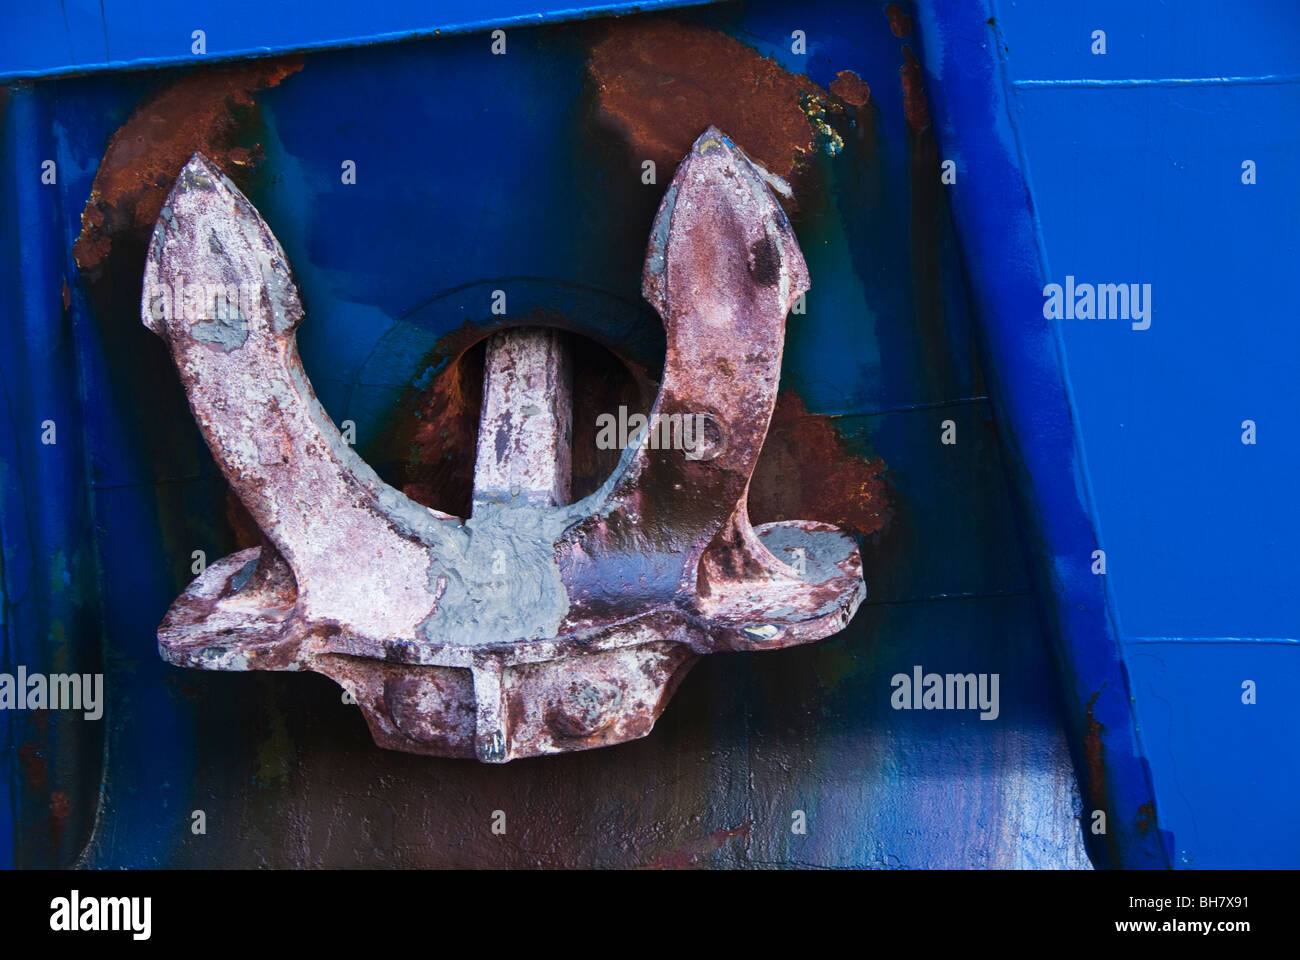 A close - up view of a ship's anchor housed in it's hawse pipe recessed in the hull. Stock Photo